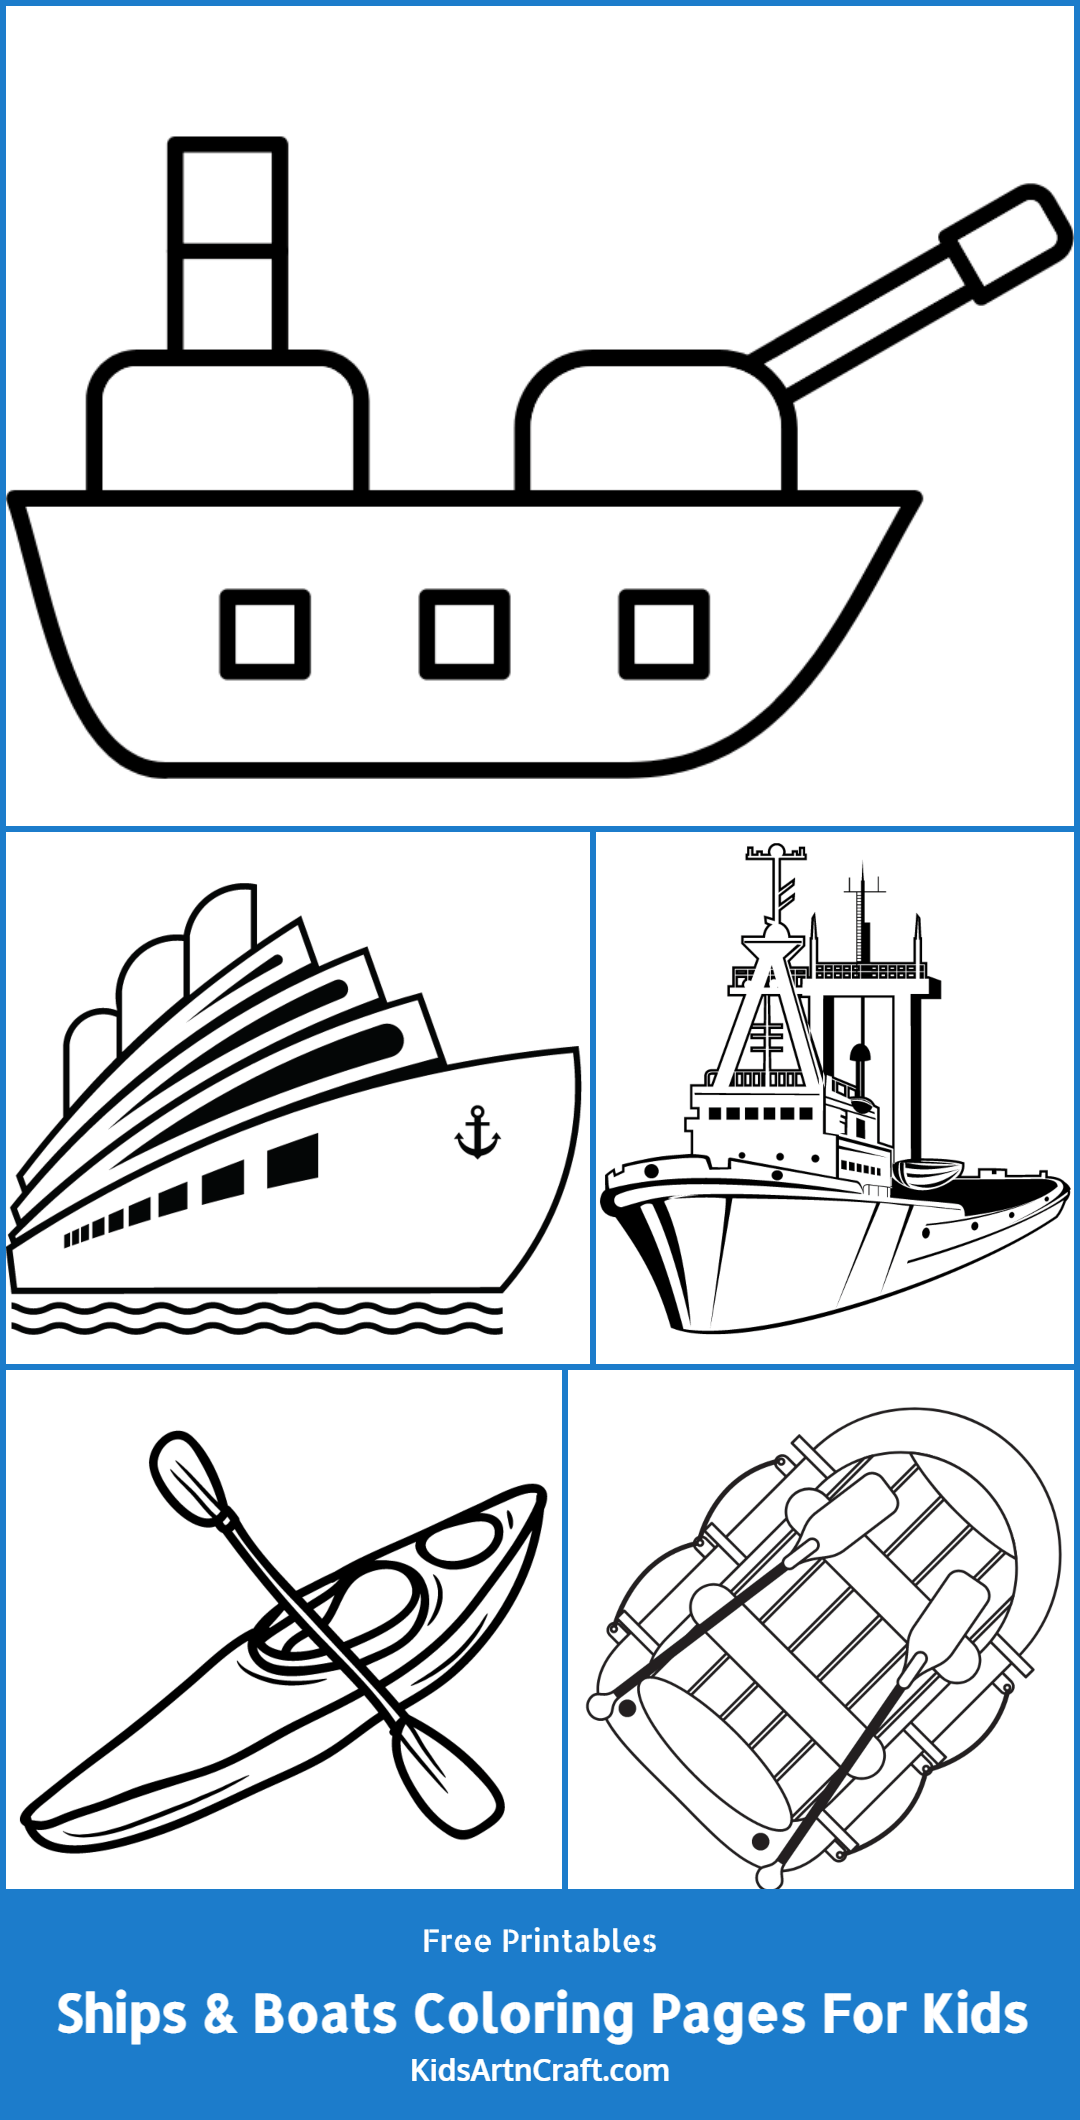 Ships and Boats Coloring Pages For Kids – Free Printables